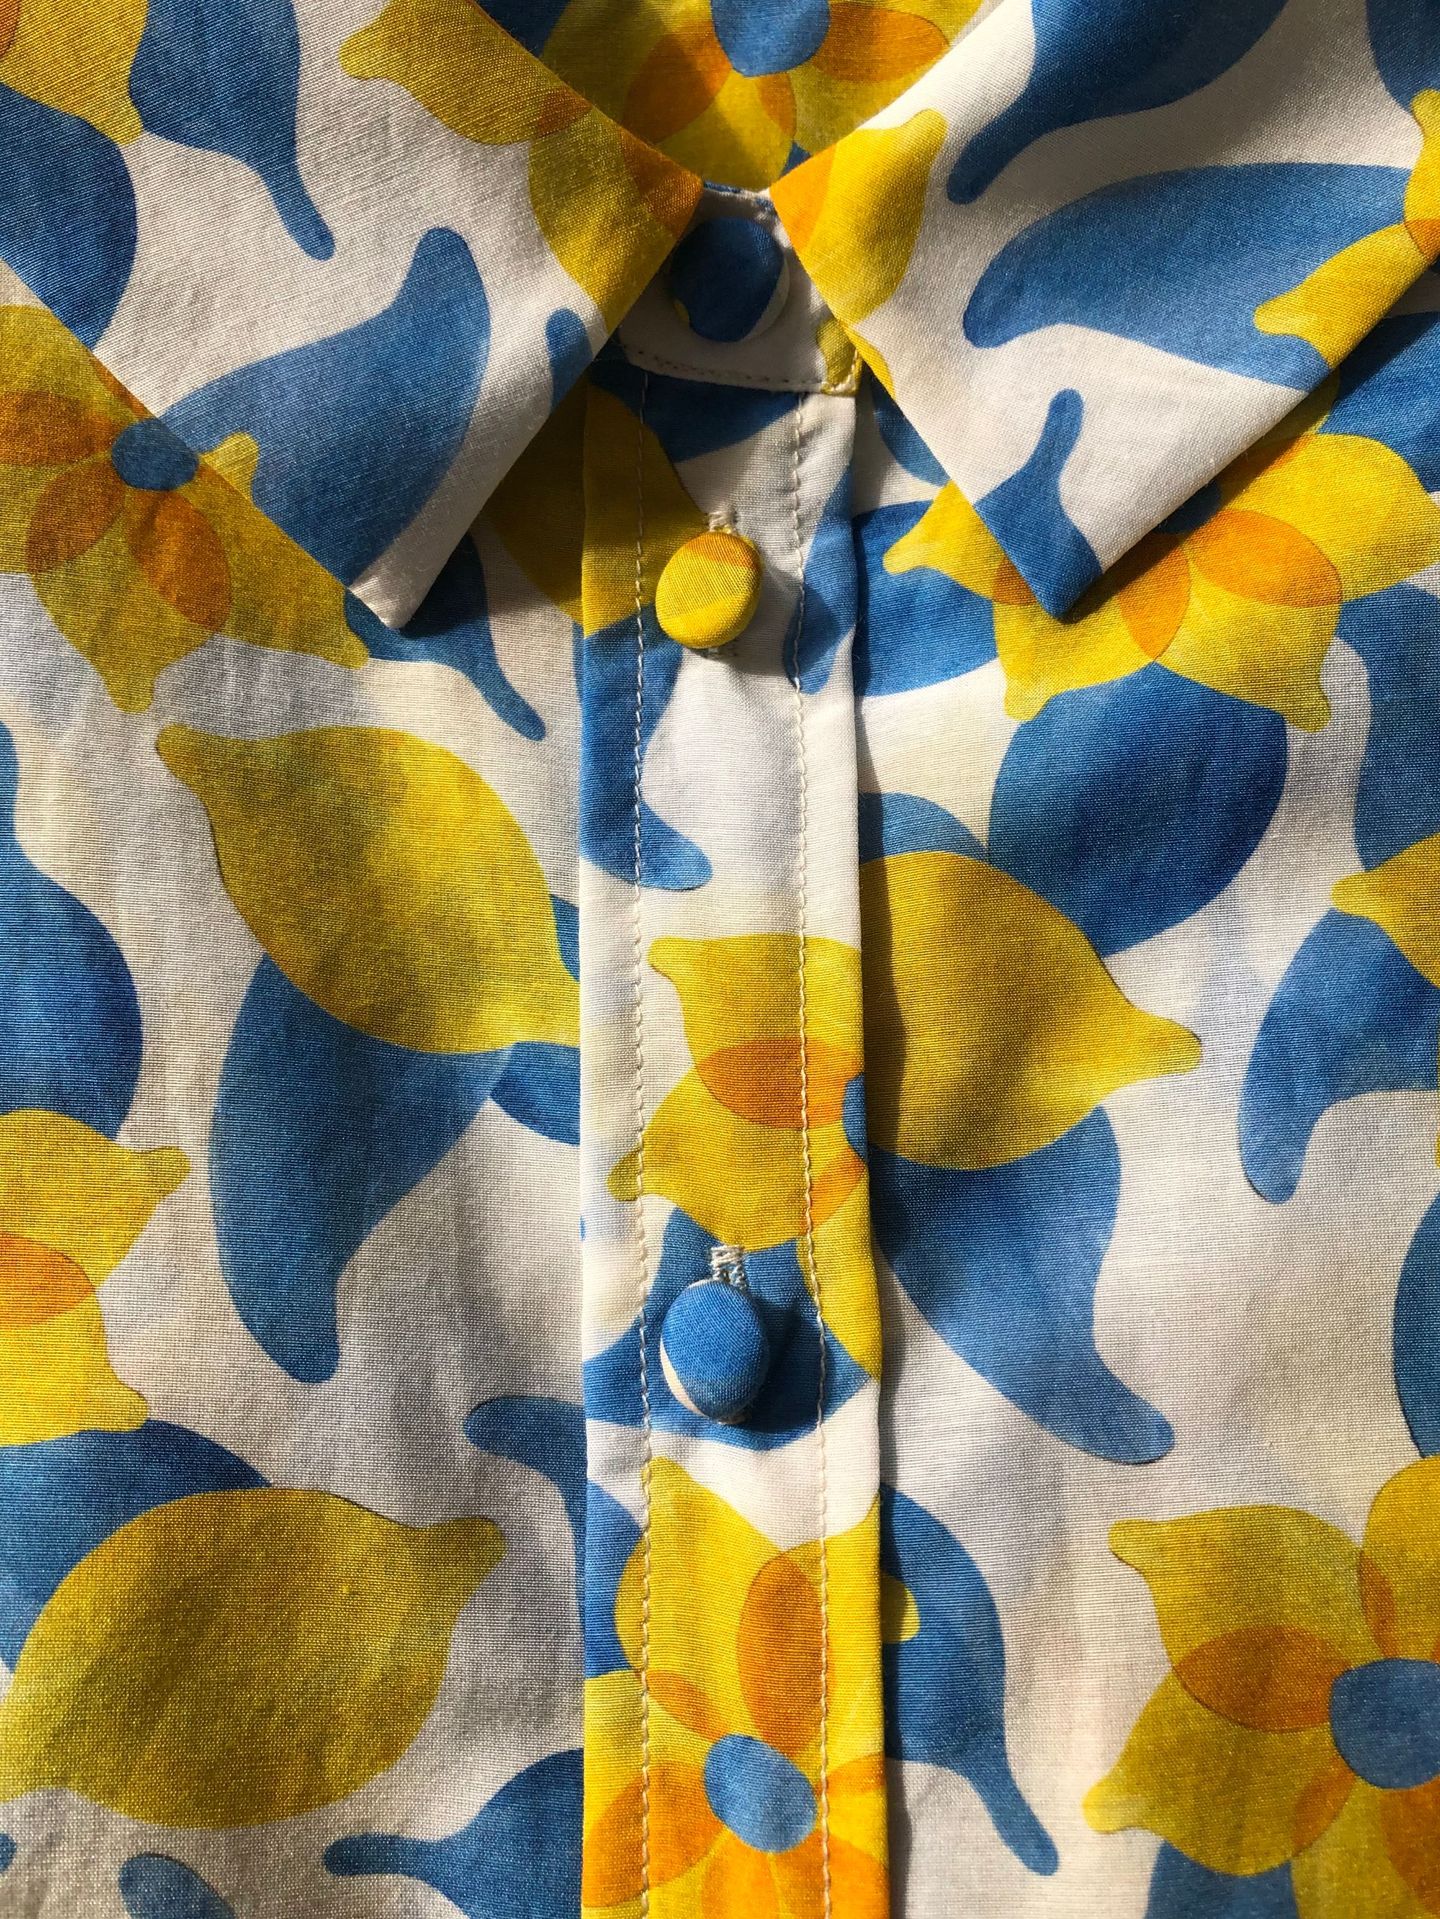 Nonothing| Silk/cotton blend shirt in yellow